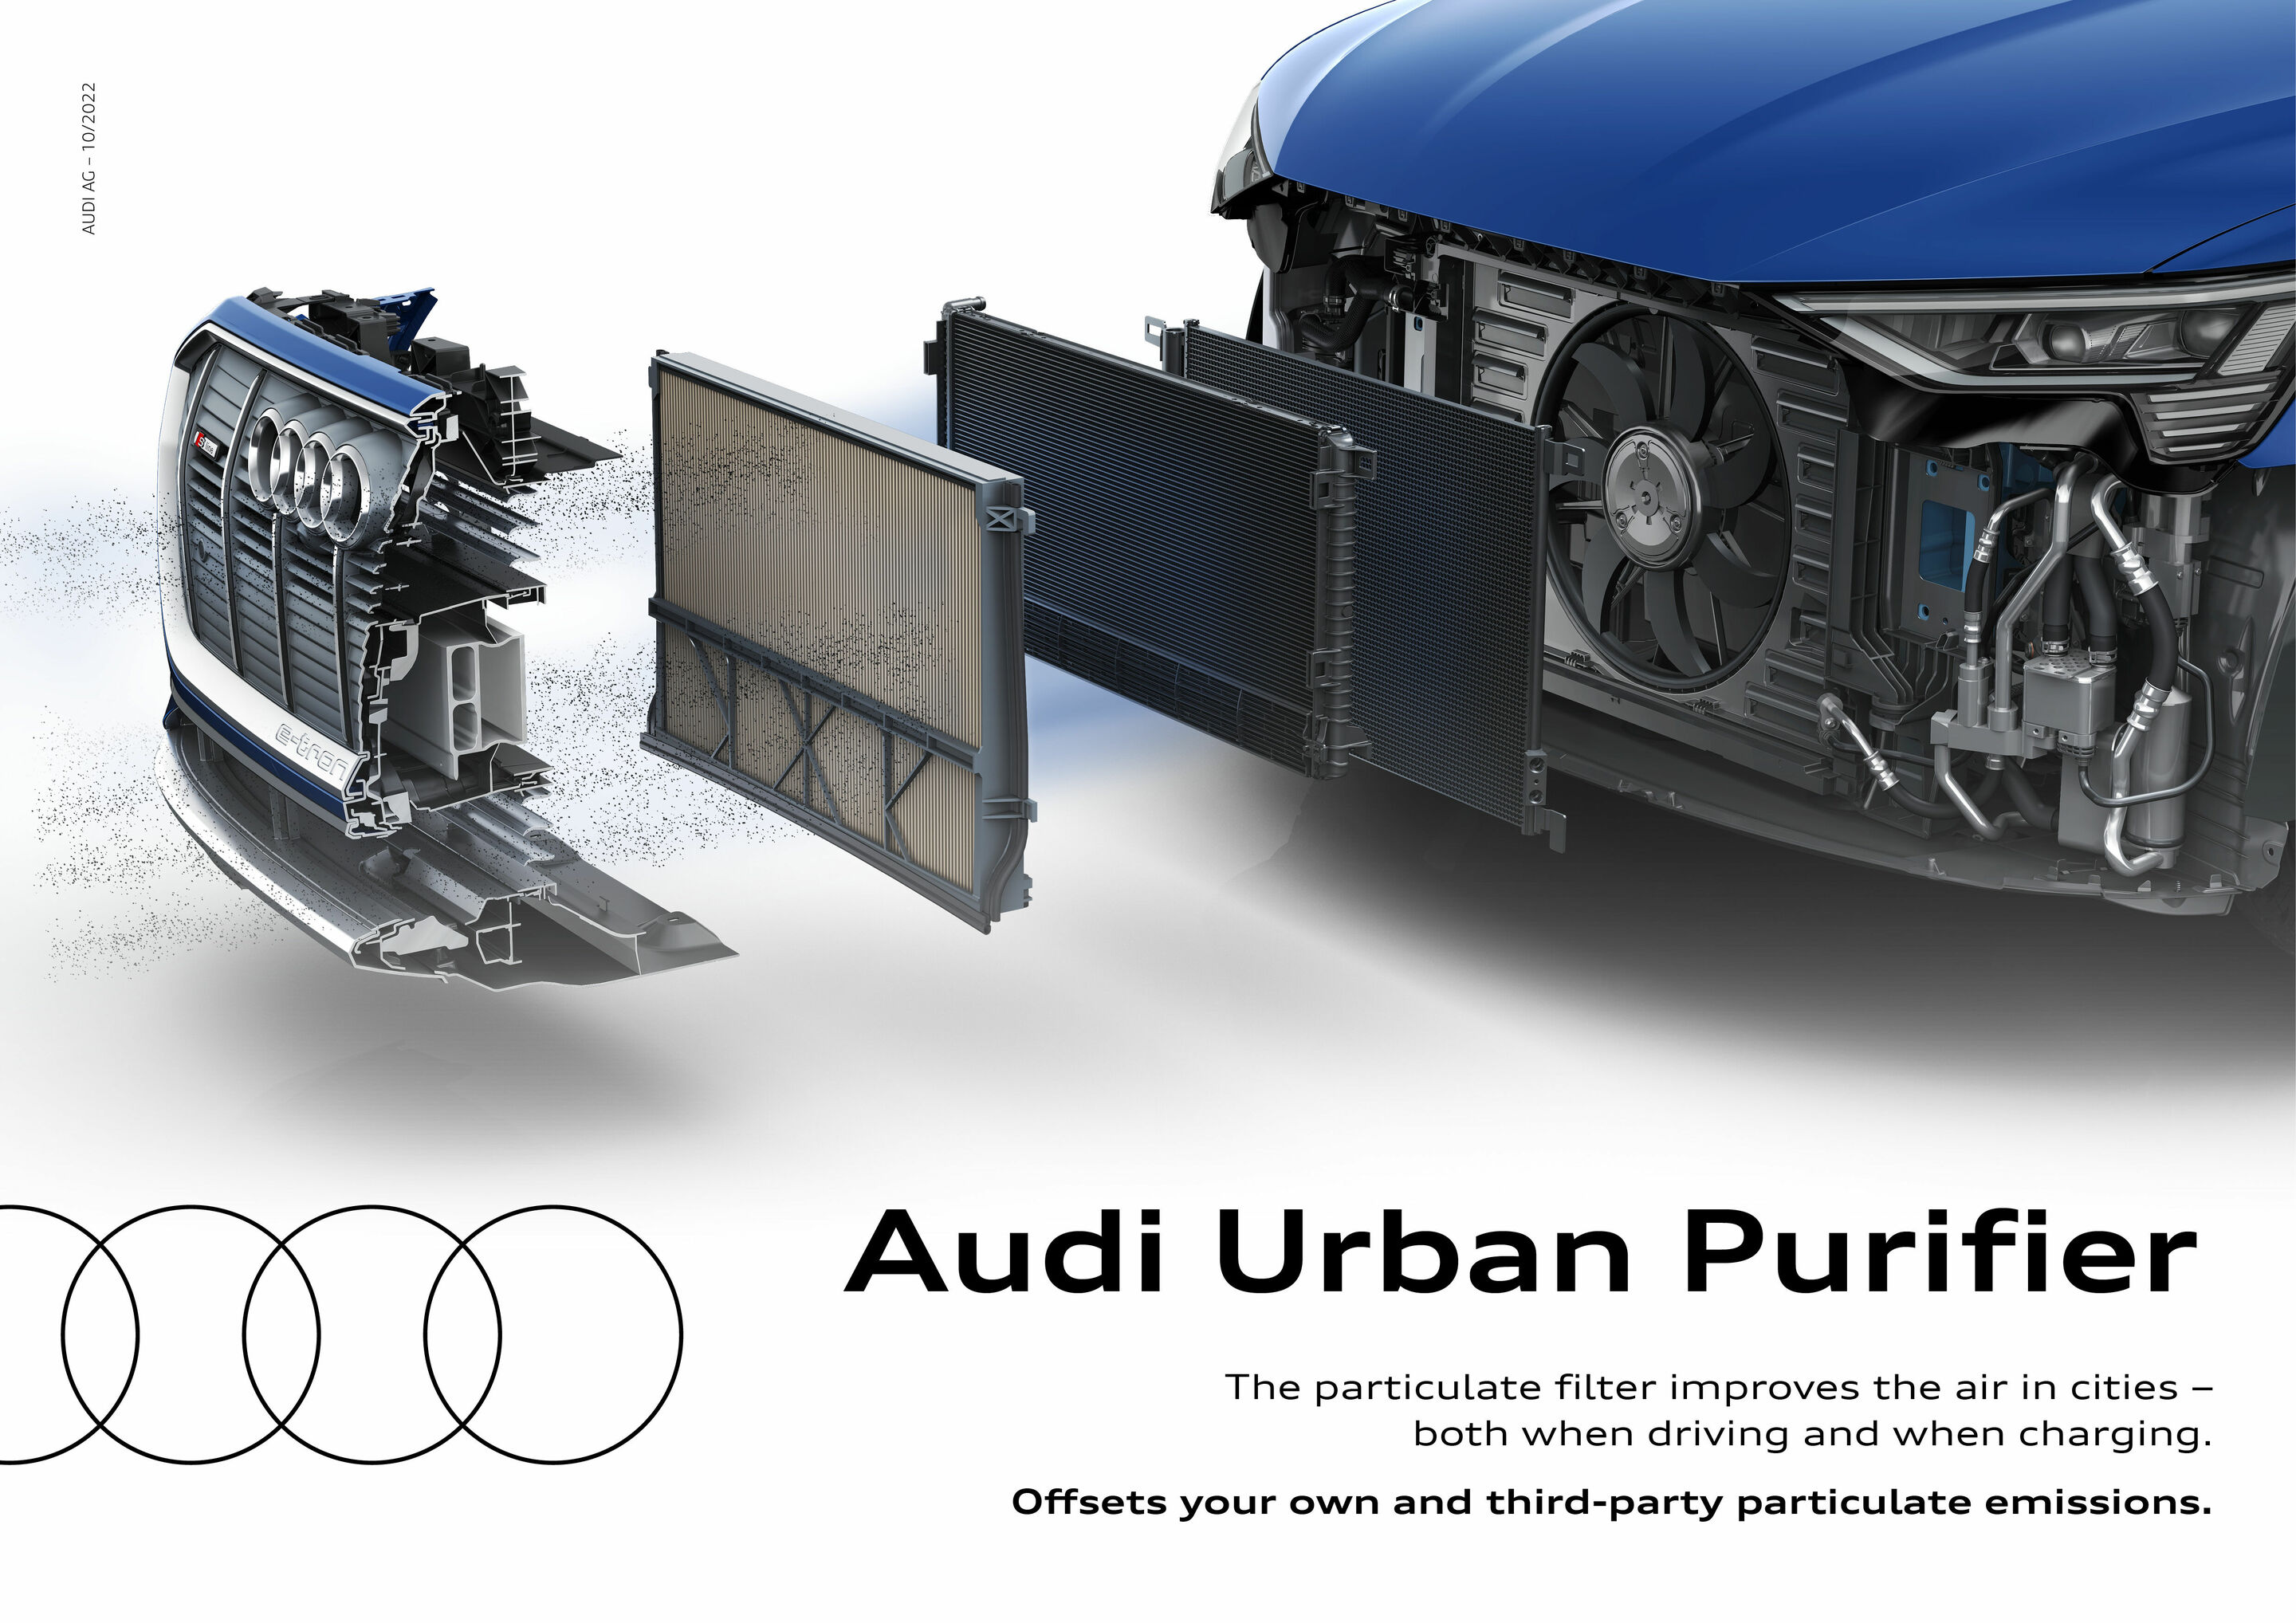 Audi Urban Purifier – The Fine Dust Filter for Electric Vehicles